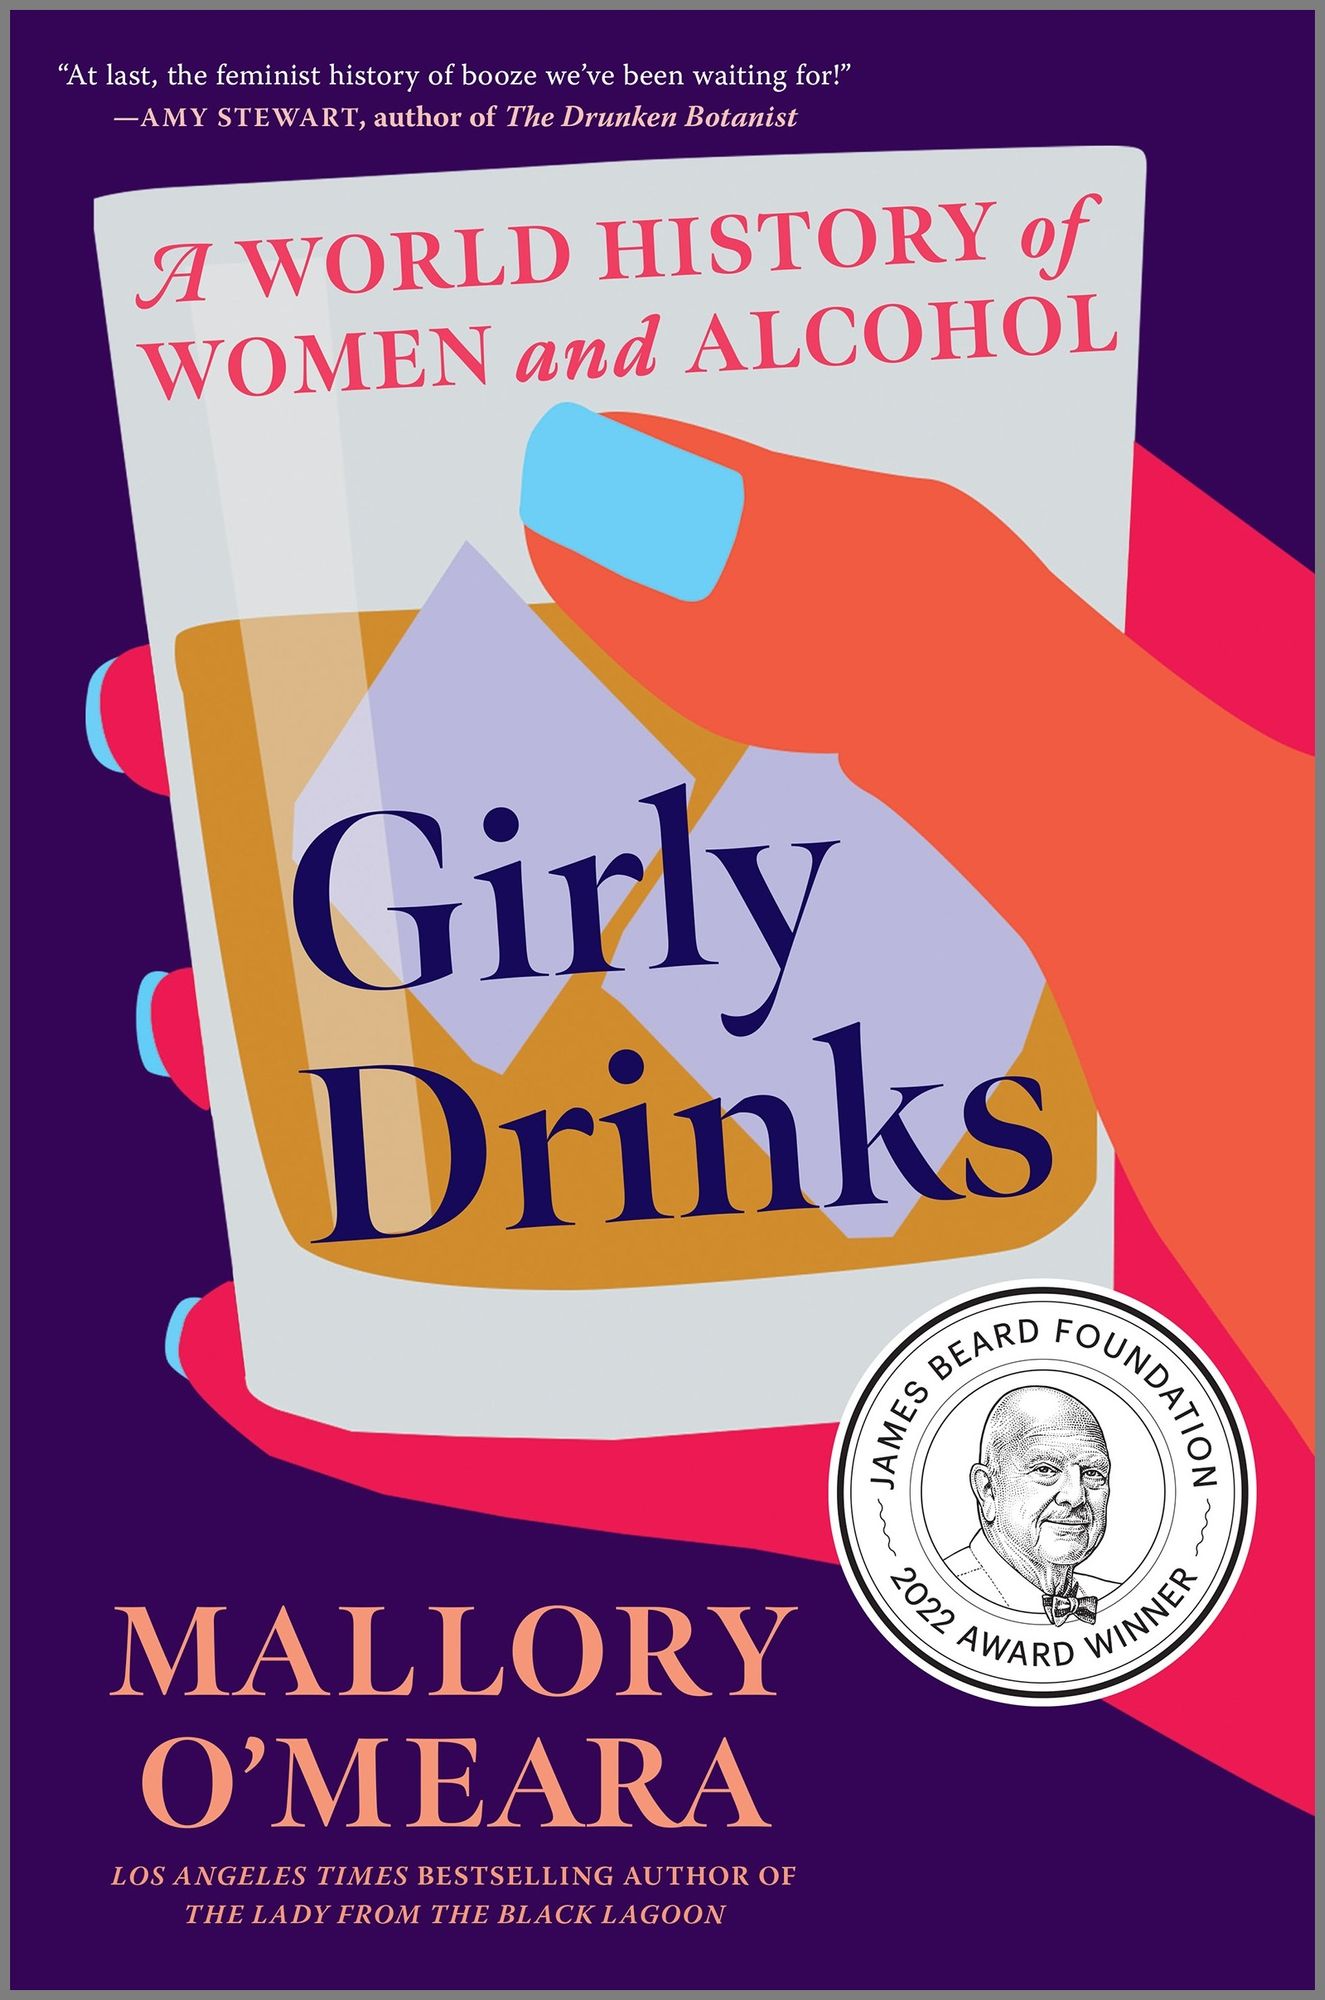 Girly Drinks by Mallory O'Meara